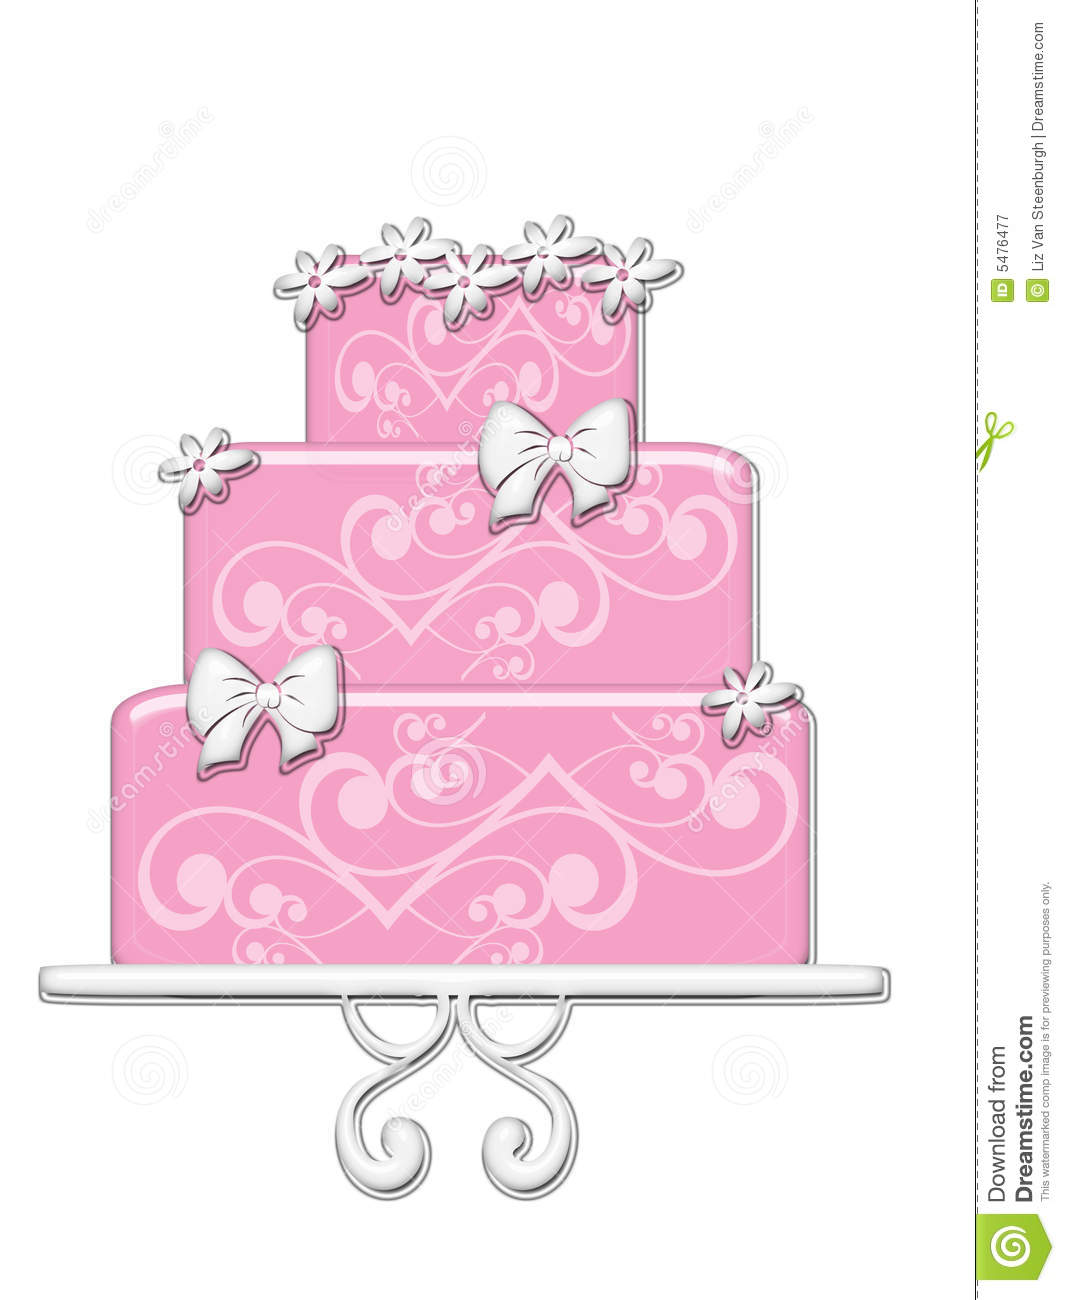 Fancy Pink Cake With Flowers Bows And Embellishments On Cake Stand 